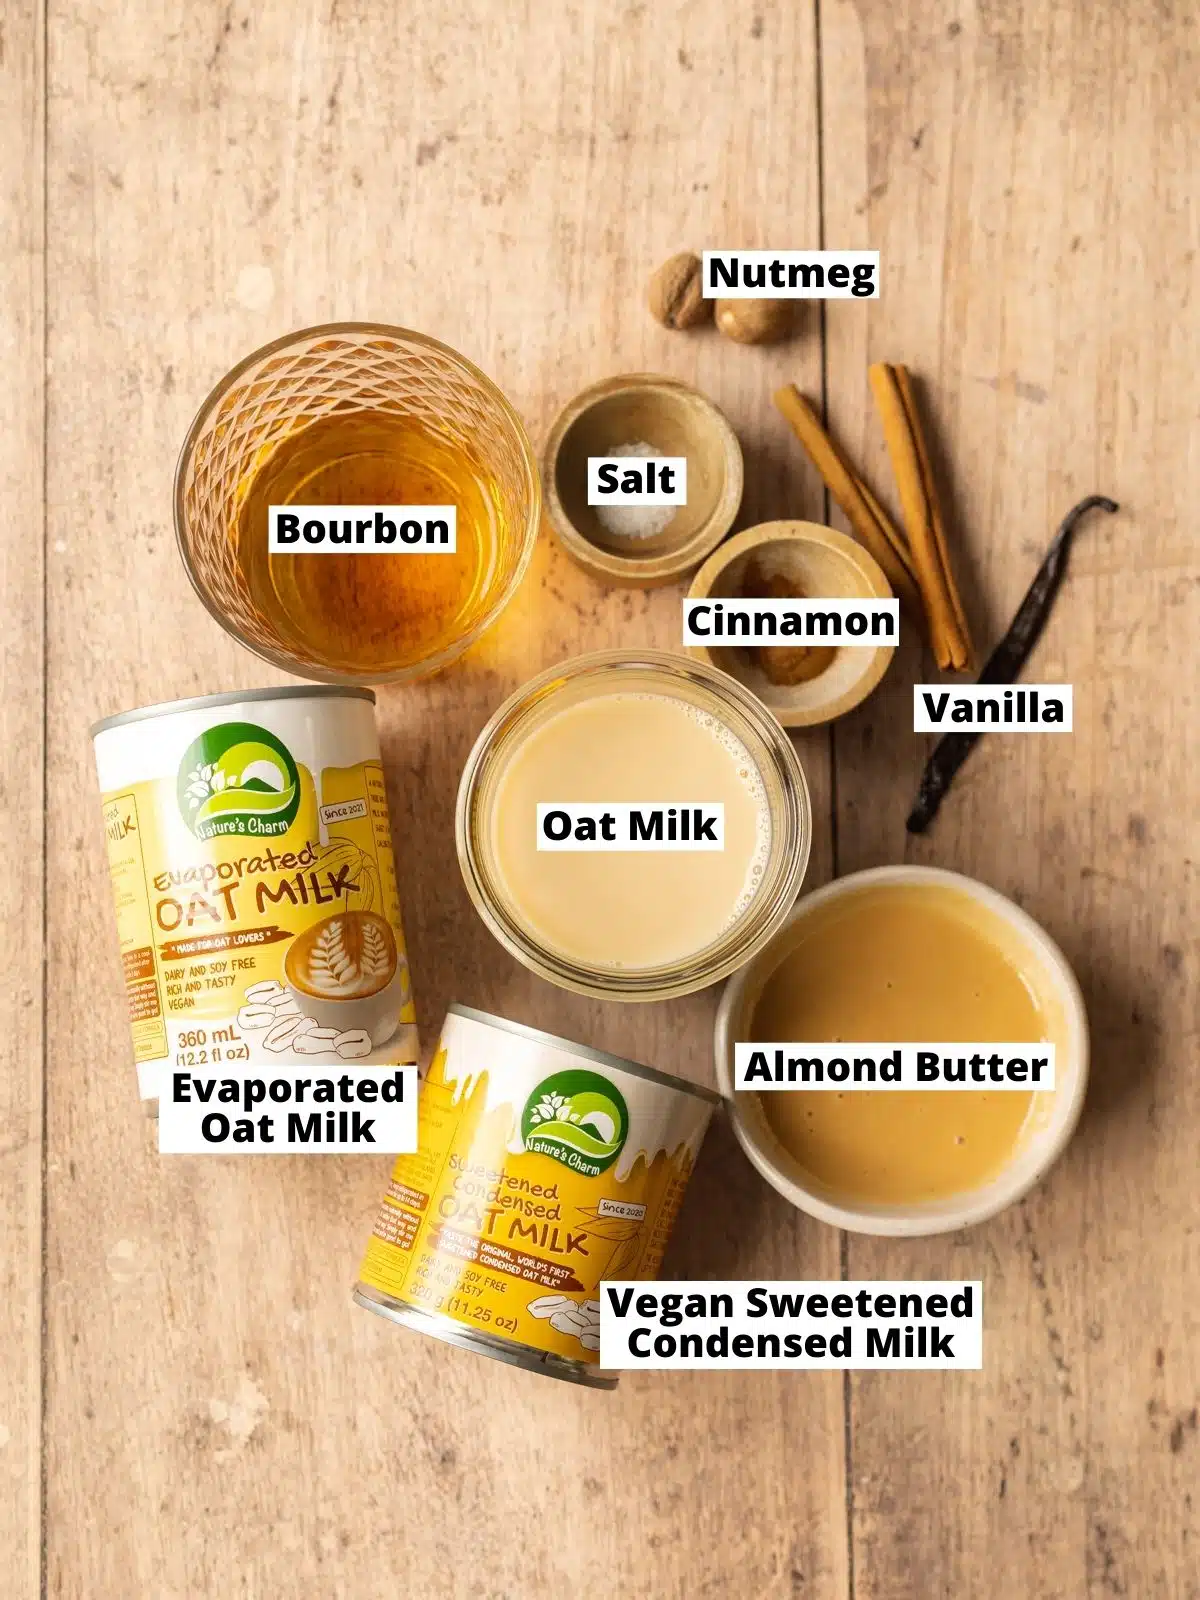 ingredients for oat nog measured out in bowls on a wooden surface.